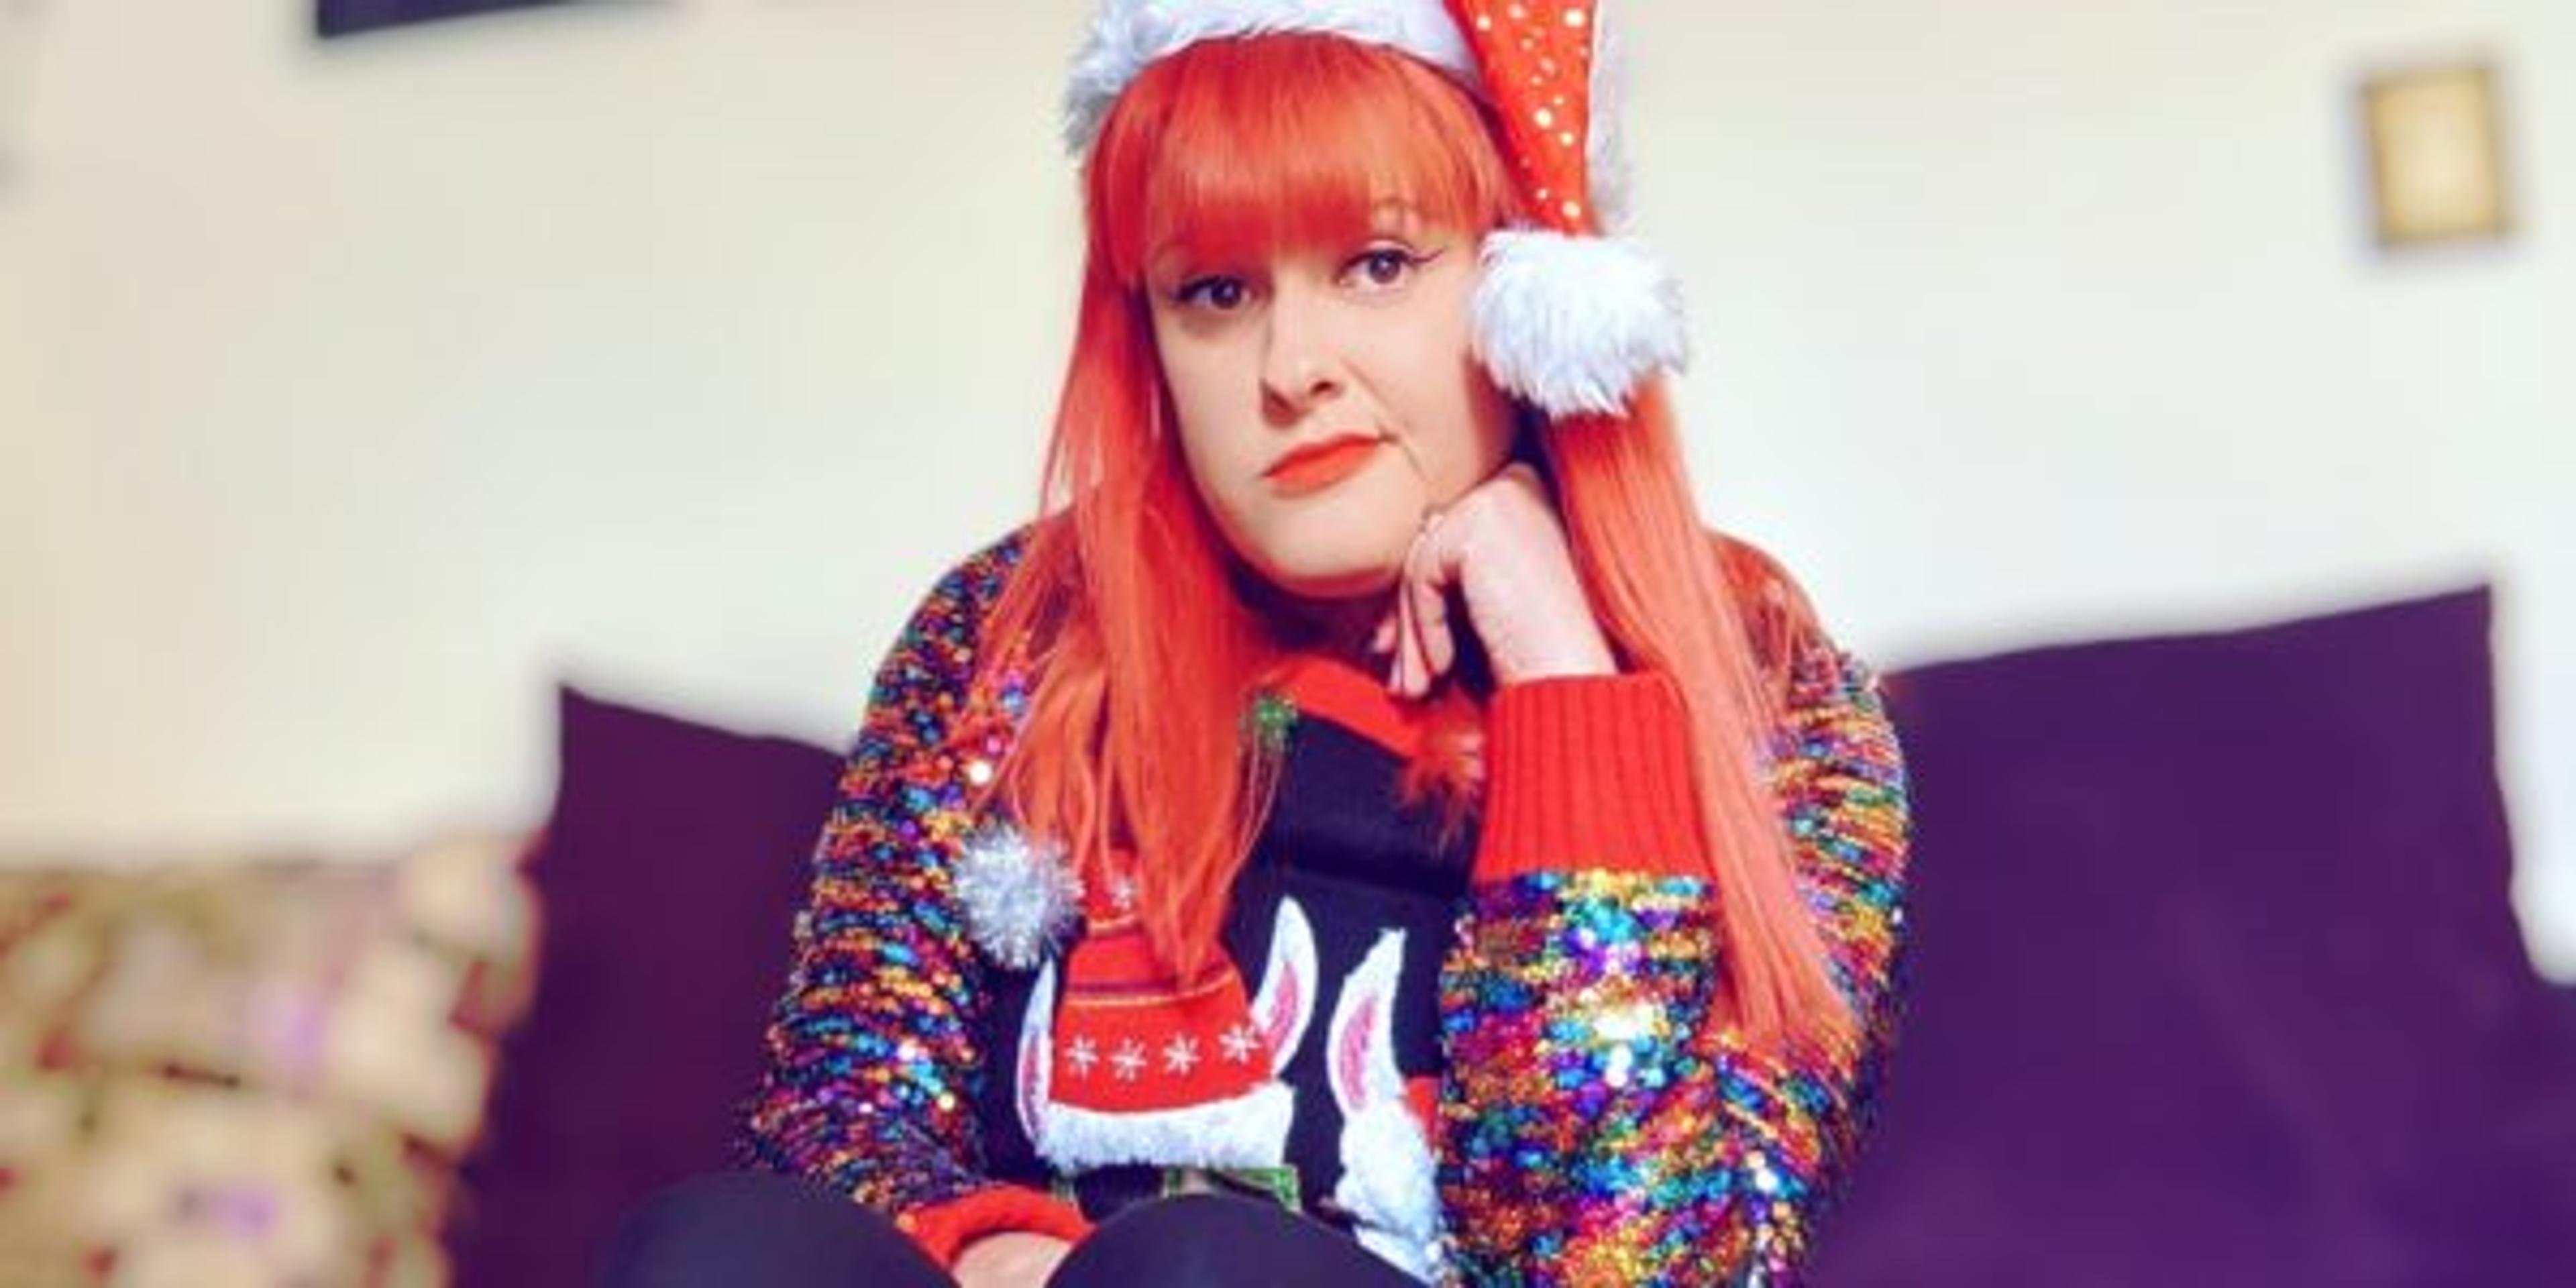 woman poses in a Santa hat while feeling sad with the holiday blues